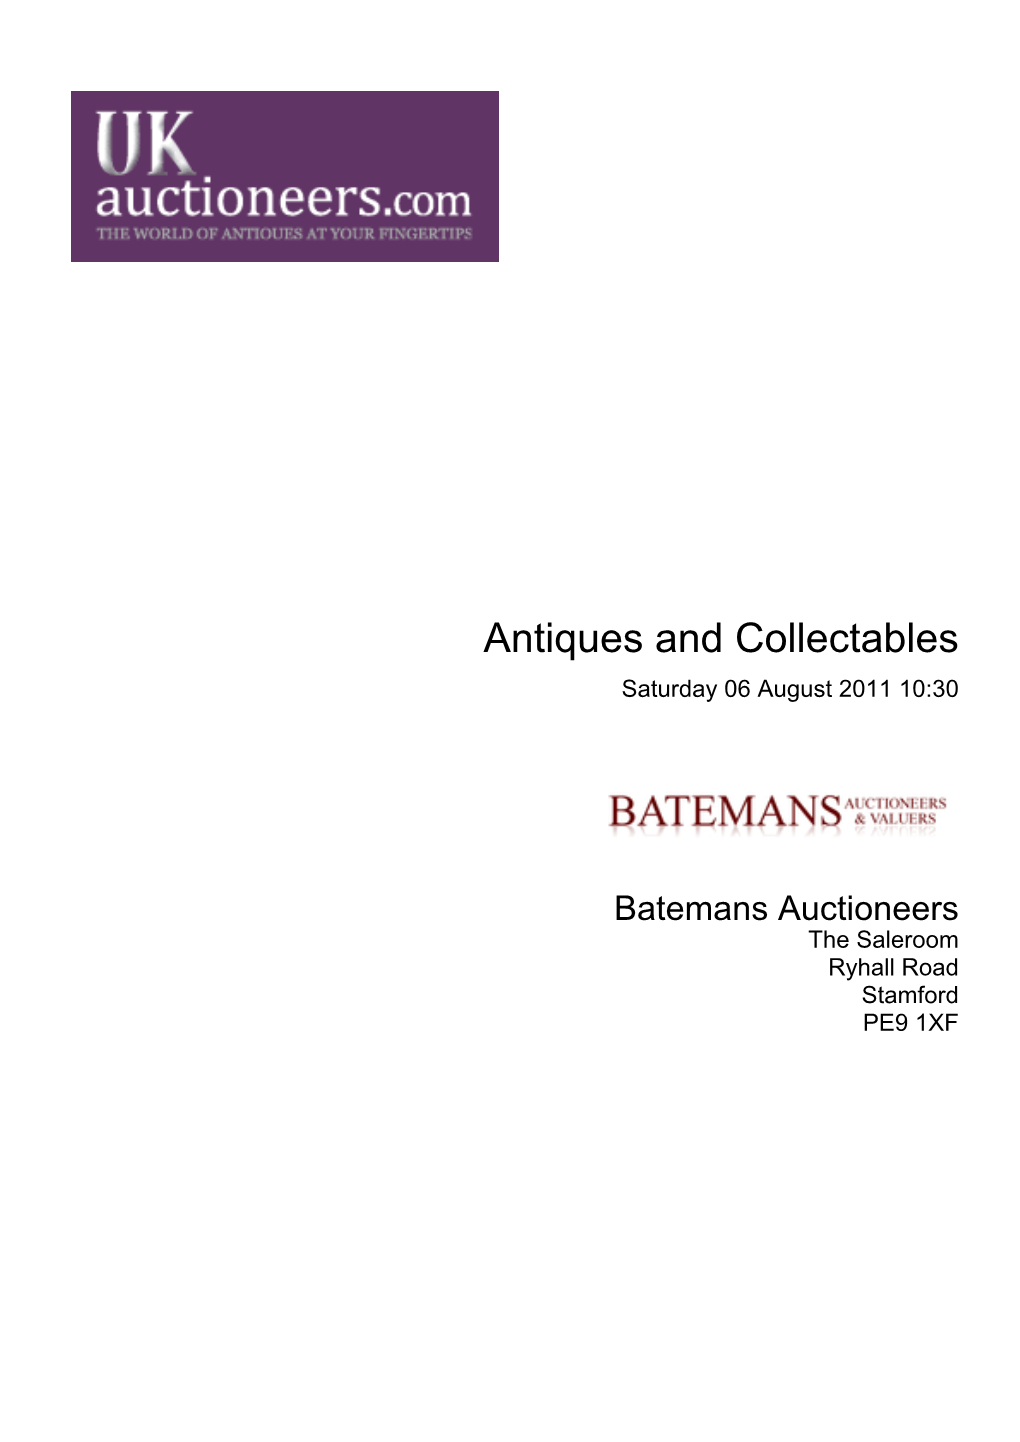 Antiques and Collectables Saturday 06 August 2011 10:30